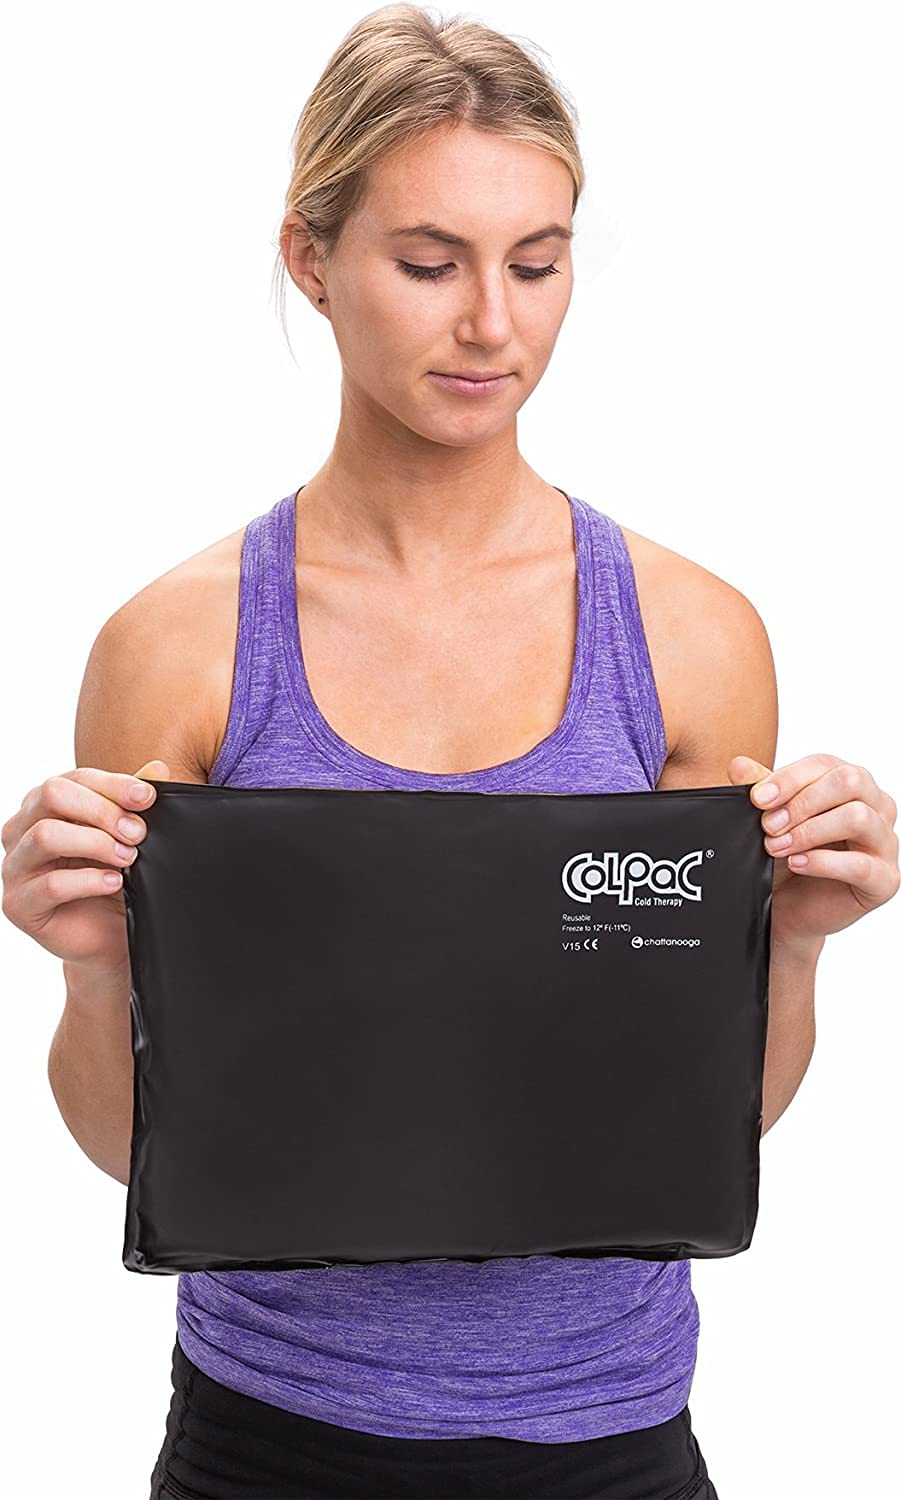 Chattanooga ColPac - Reusable Gel Ice Pack - Black Polyurethane - Standard - 10 in x 13.5 in - Cold Therapy - Knee, Arm, Elbow, Shoulder, Back - Aches, Swelling, Bruises, Sprains, Inflammation